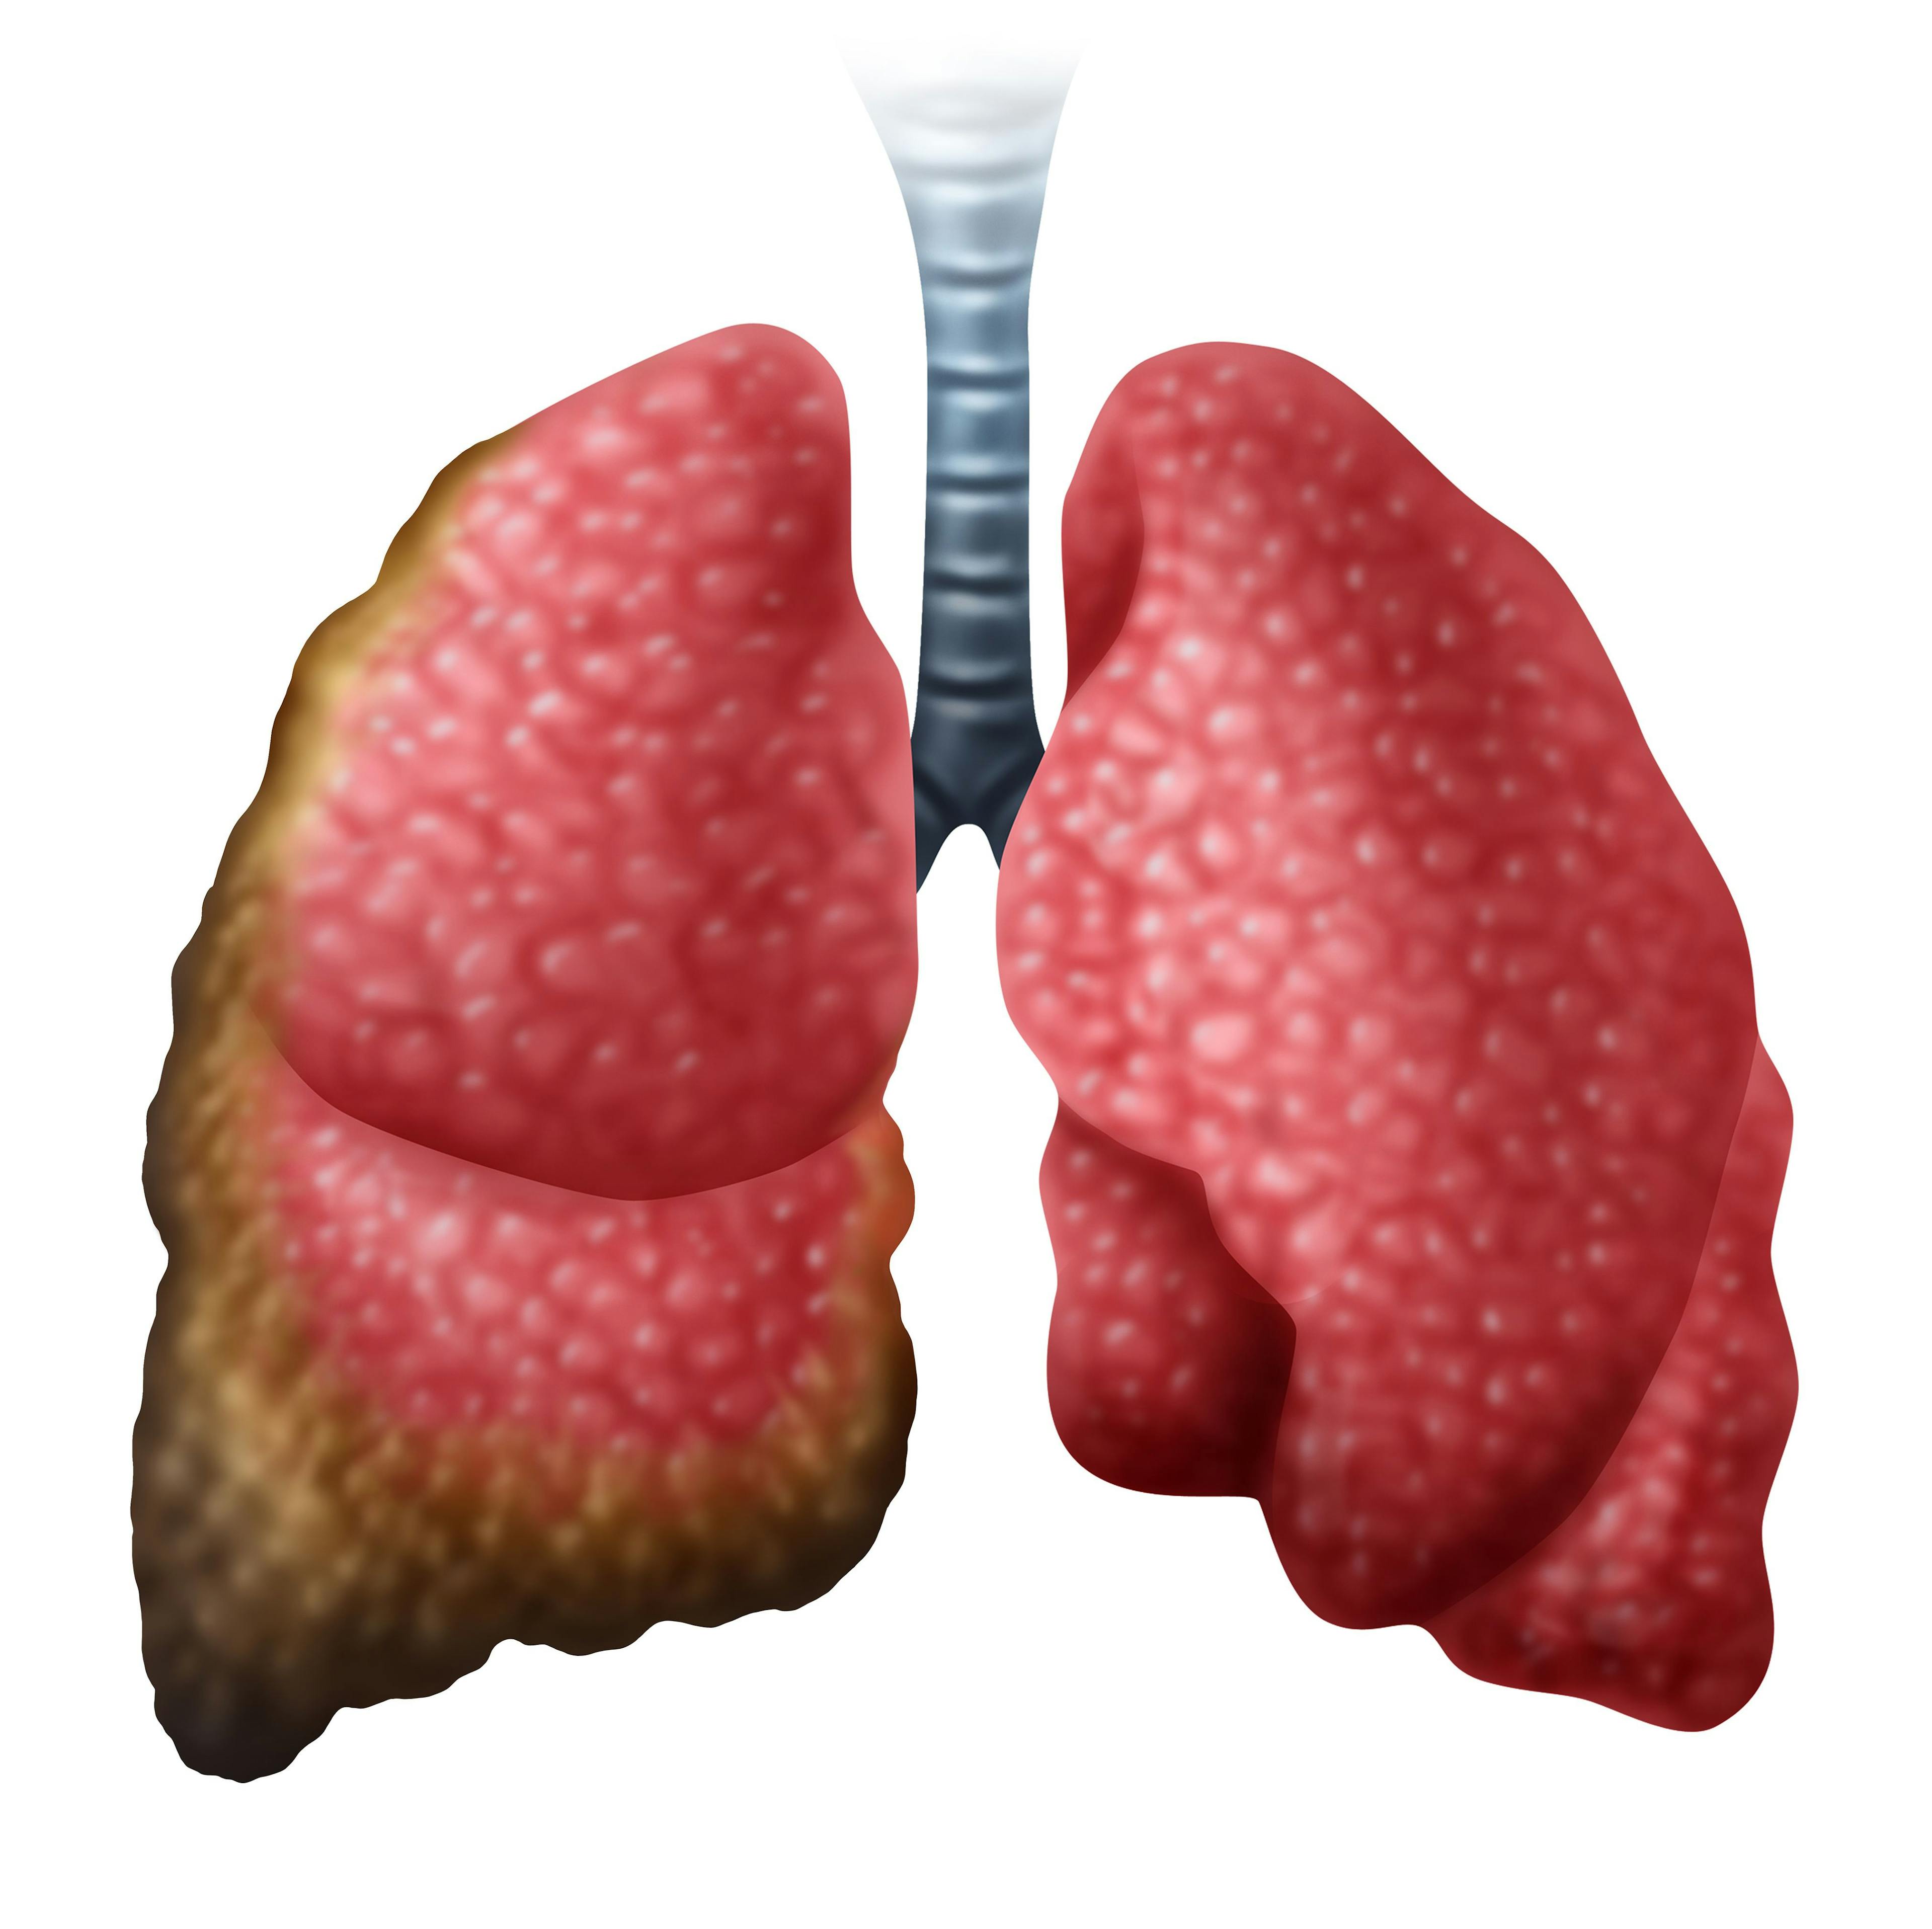 FDA Approves Immunotherapy Combination for Previously Untreated Unresectable Malignant Pleural Mesothelioma